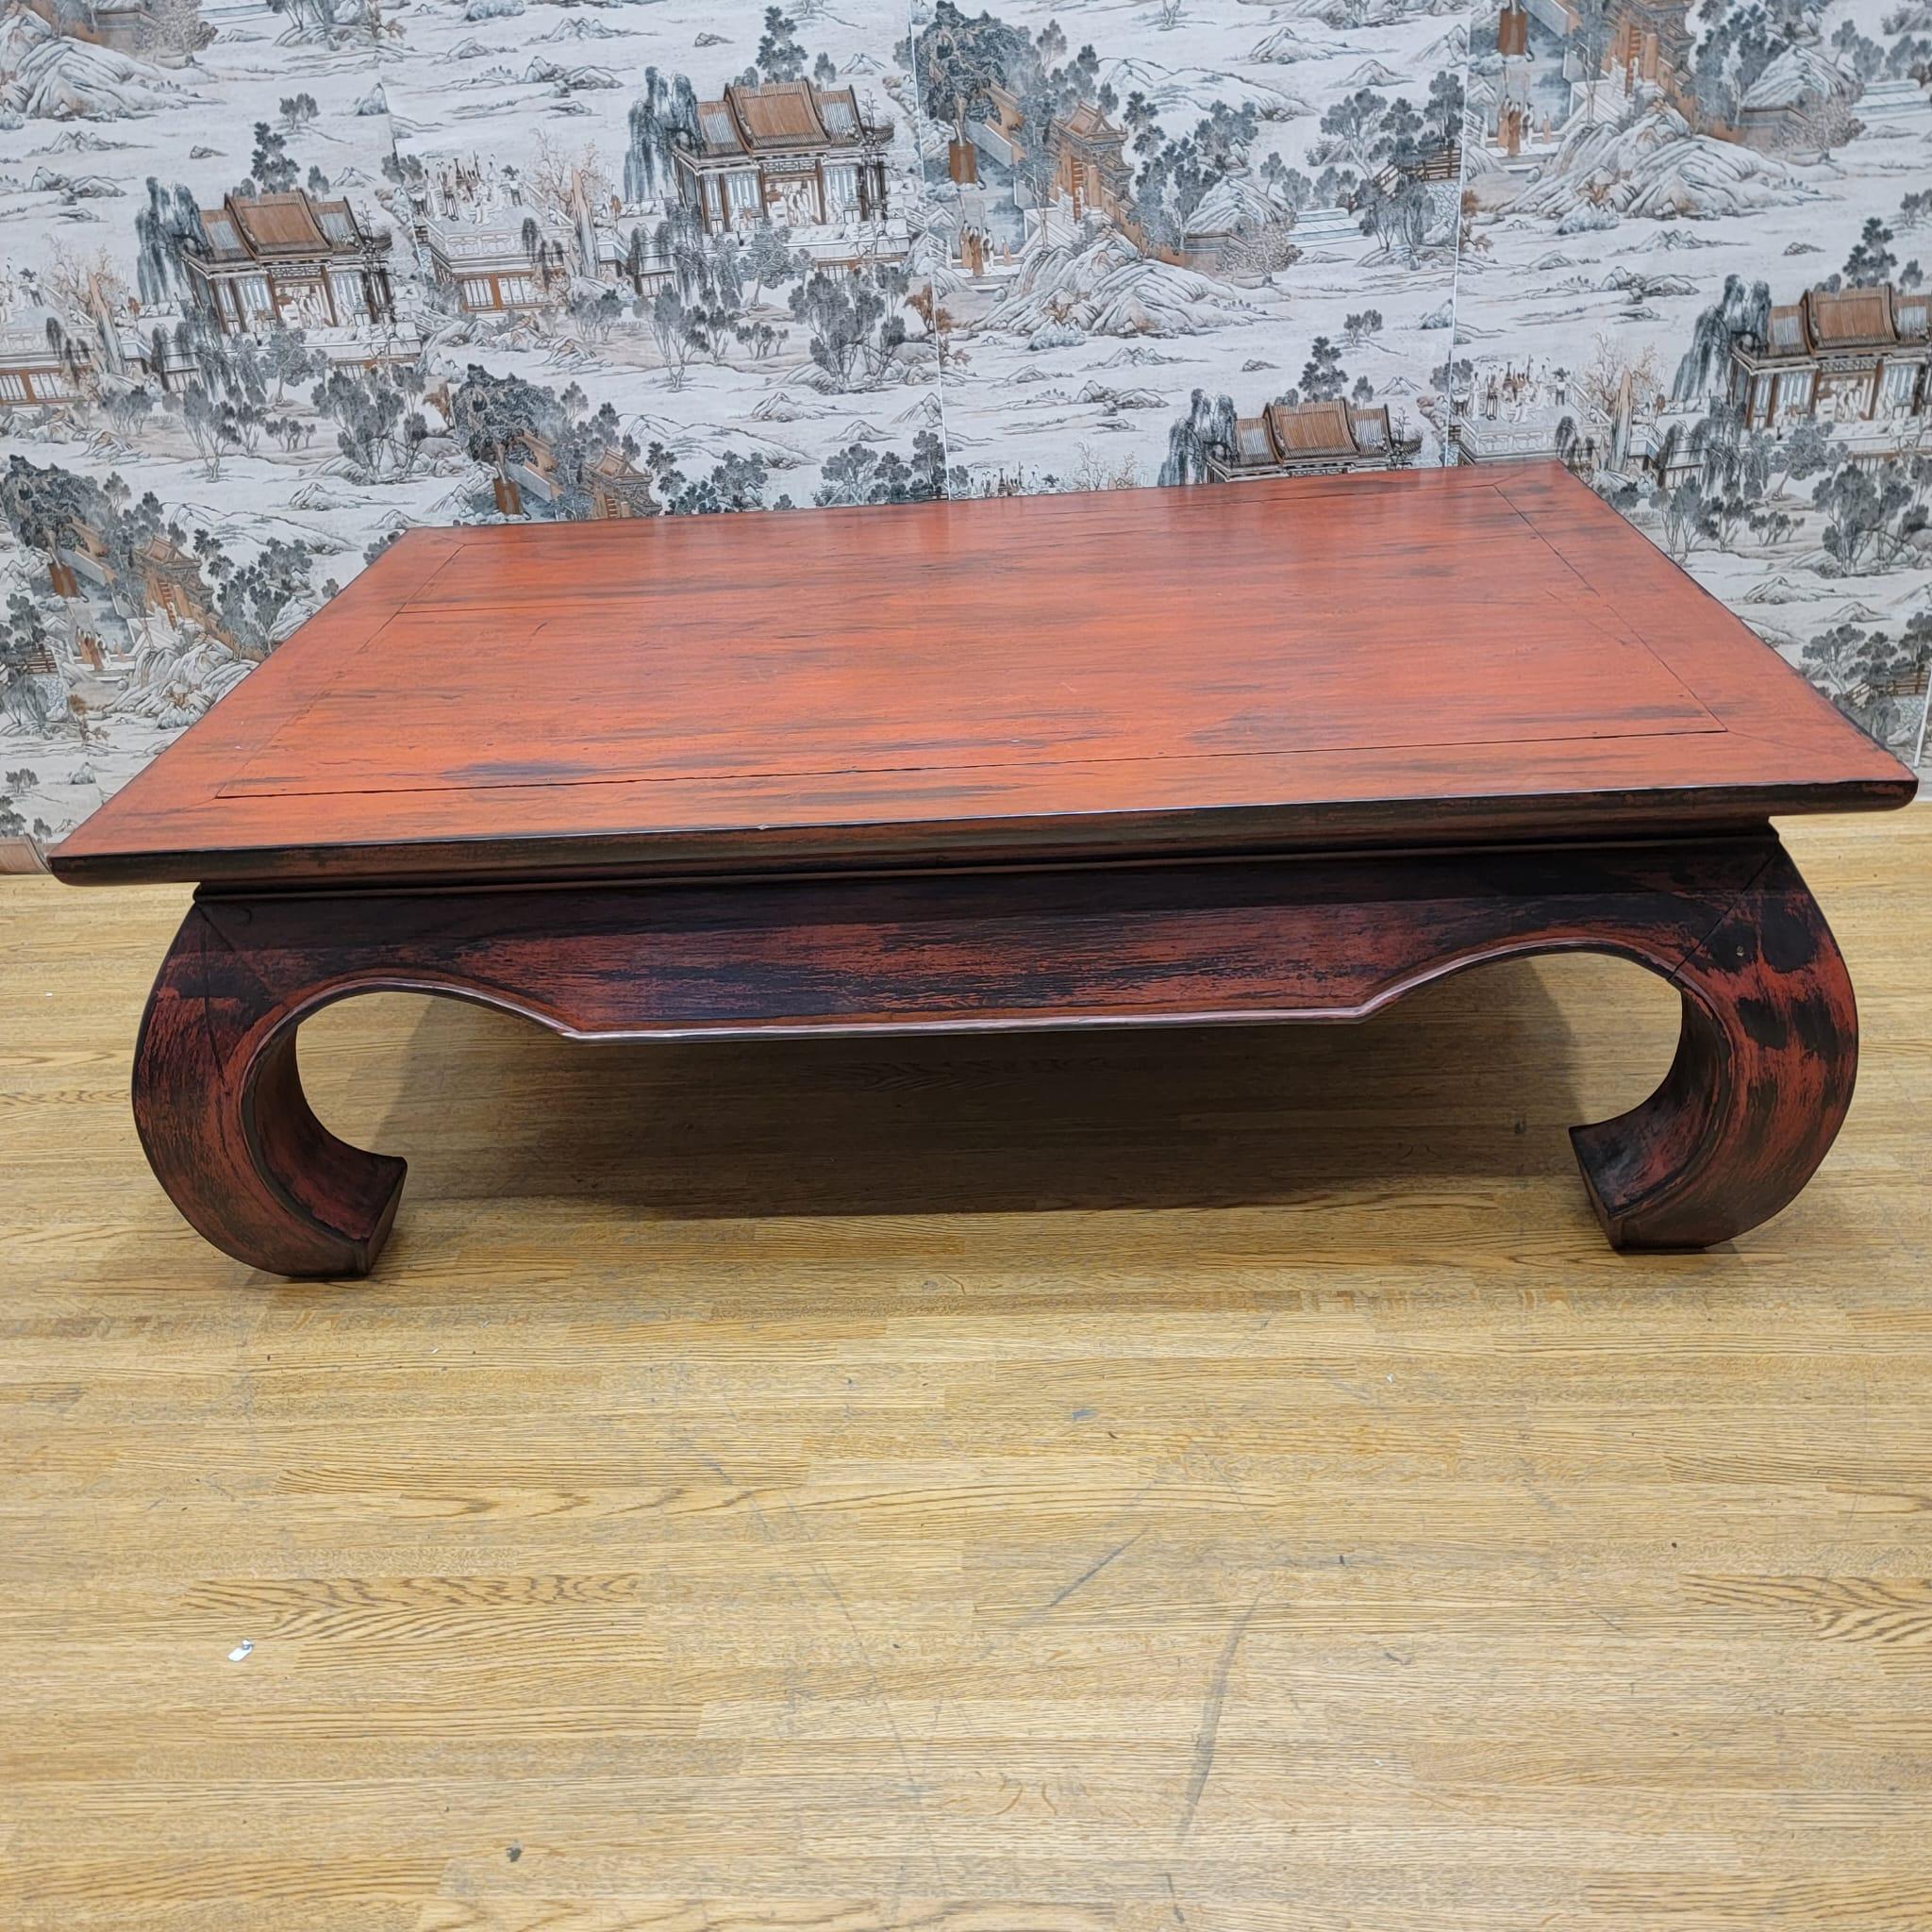 Hand-Crafted Vintage Kang Style Chinese Teakwood Red Lacquer Coffee Table For Sale